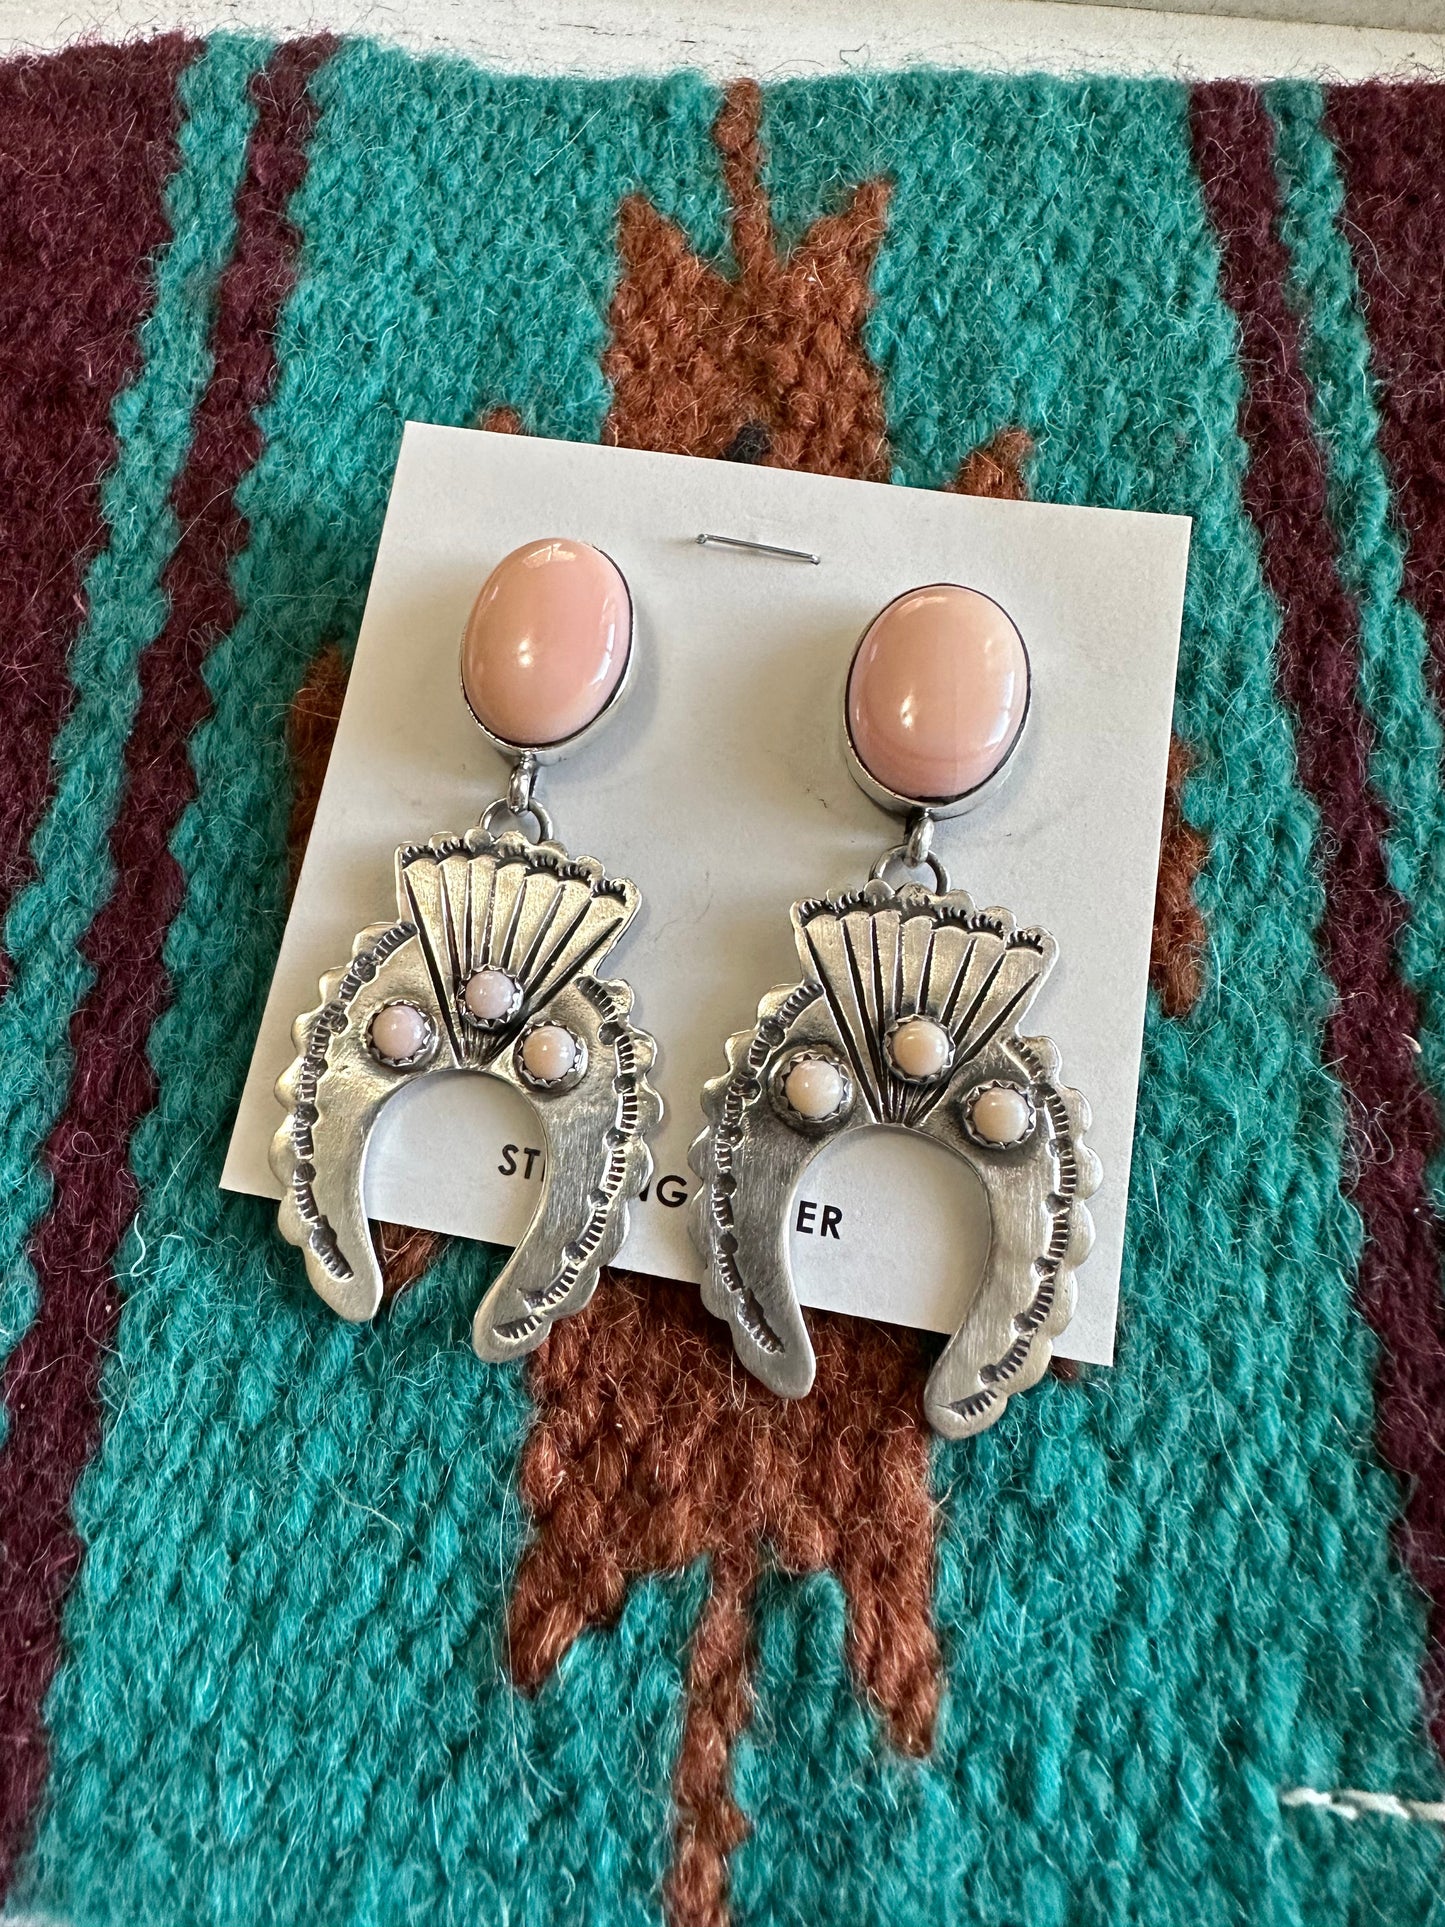 “Sahara Sunset” Navajo Queen Pink Conch & Sterling Silver Concho Dangle Earrings Signed